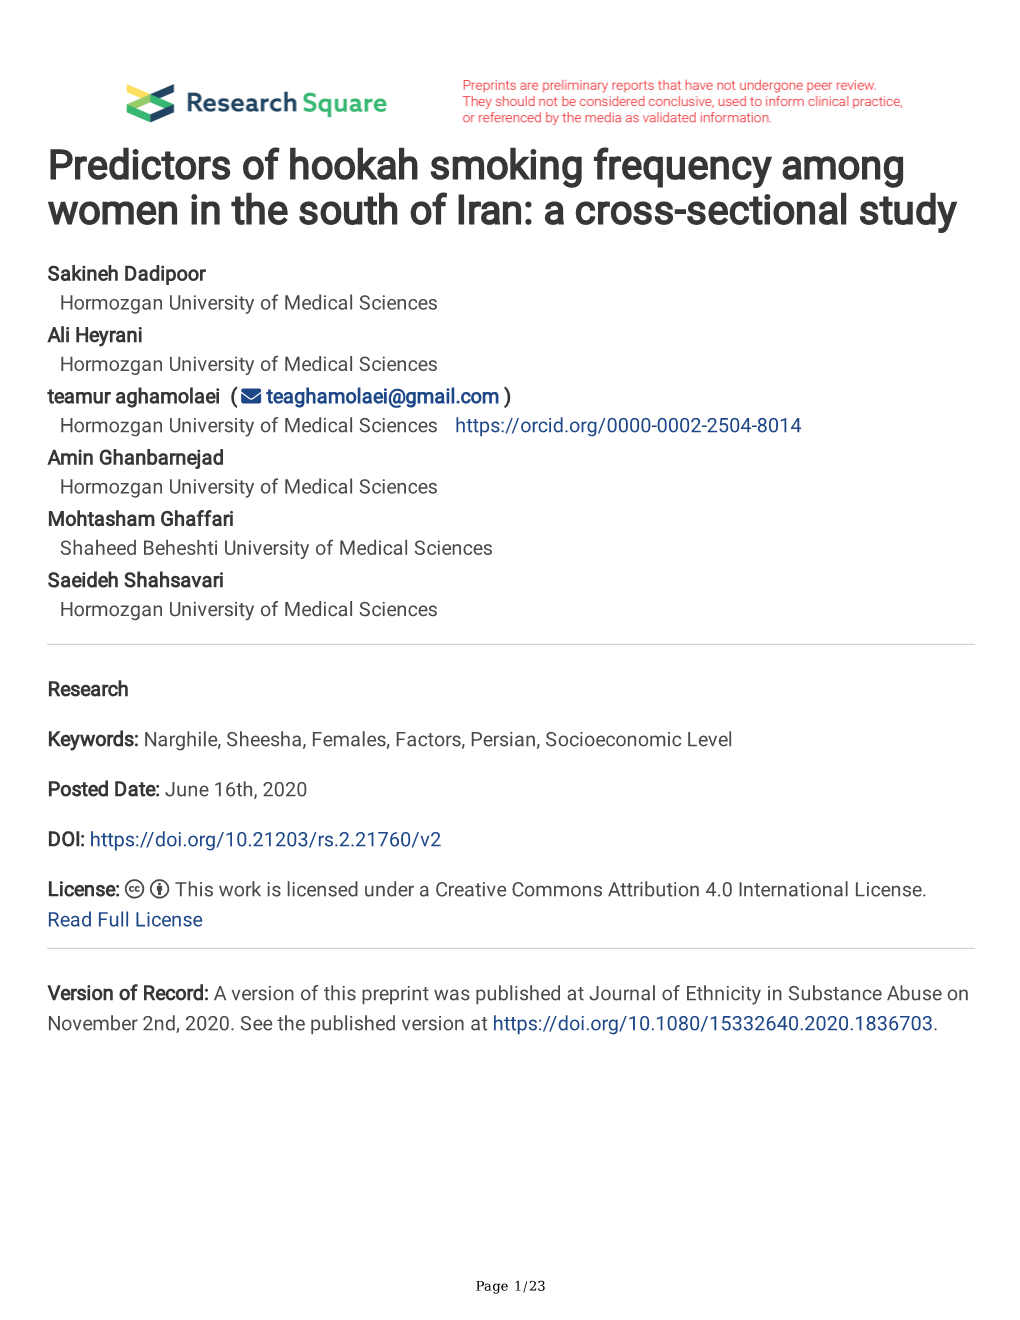 Predictors of Hookah Smoking Frequency Among Women in the South of Iran: a Cross-Sectional Study